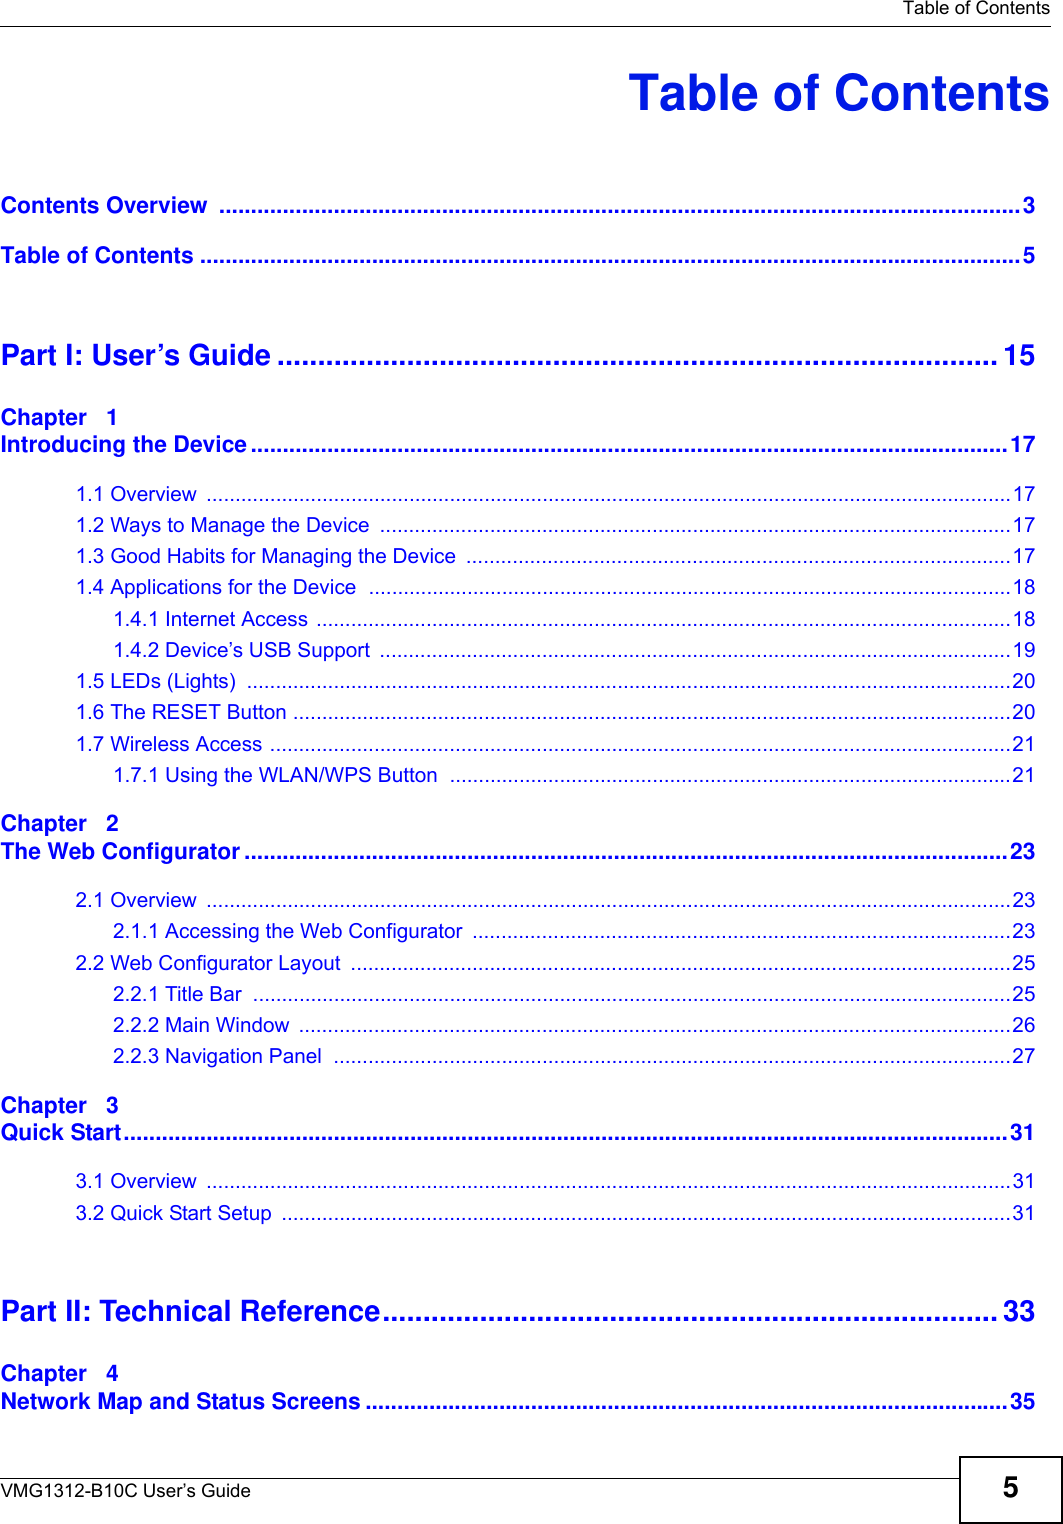   Table of ContentsVMG1312-B10C User’s Guide 5Table of ContentsContents Overview  ..............................................................................................................................3Table of Contents .................................................................................................................................5Part I: User’s Guide ......................................................................................... 15Chapter   1Introducing the Device .......................................................................................................................171.1 Overview  ...........................................................................................................................................171.2 Ways to Manage the Device  .............................................................................................................171.3 Good Habits for Managing the Device  ..............................................................................................171.4 Applications for the Device  ...............................................................................................................181.4.1 Internet Access ........................................................................................................................181.4.2 Device’s USB Support  .............................................................................................................191.5 LEDs (Lights)  ....................................................................................................................................201.6 The RESET Button ............................................................................................................................201.7 Wireless Access ................................................................................................................................211.7.1 Using the WLAN/WPS Button  .................................................................................................21Chapter   2The Web Configurator ........................................................................................................................232.1 Overview  ...........................................................................................................................................232.1.1 Accessing the Web Configurator  .............................................................................................232.2 Web Configurator Layout  ..................................................................................................................252.2.1 Title Bar  ...................................................................................................................................252.2.2 Main Window  ...........................................................................................................................262.2.3 Navigation Panel  .....................................................................................................................27Chapter   3Quick Start...........................................................................................................................................313.1 Overview  ...........................................................................................................................................313.2 Quick Start Setup  ..............................................................................................................................31Part II: Technical Reference............................................................................ 33Chapter   4Network Map and Status Screens .....................................................................................................35